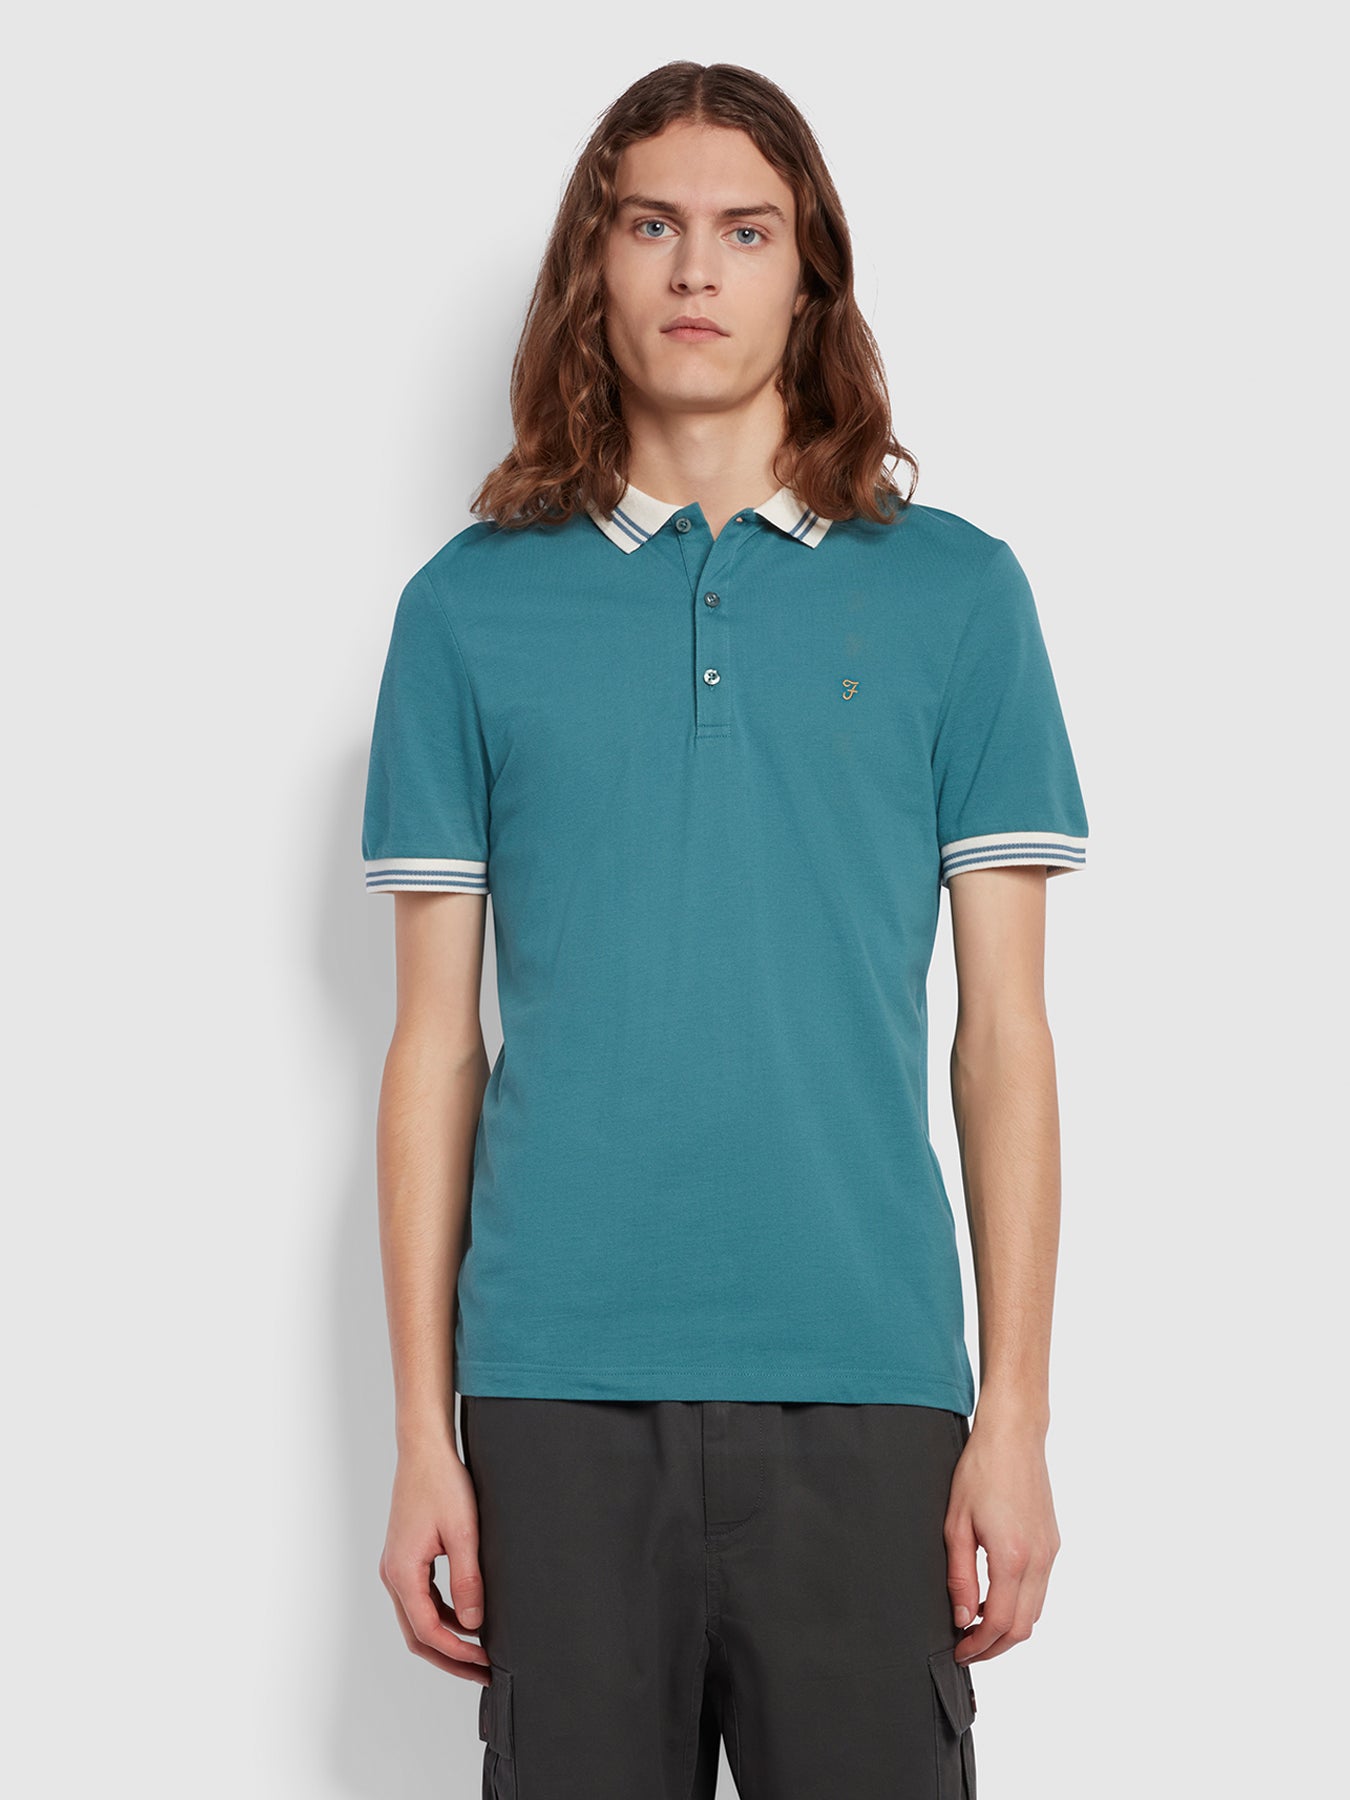 View Stanton Slim Fit Short Sleeve Tipped Polo Shirt In Ocean information